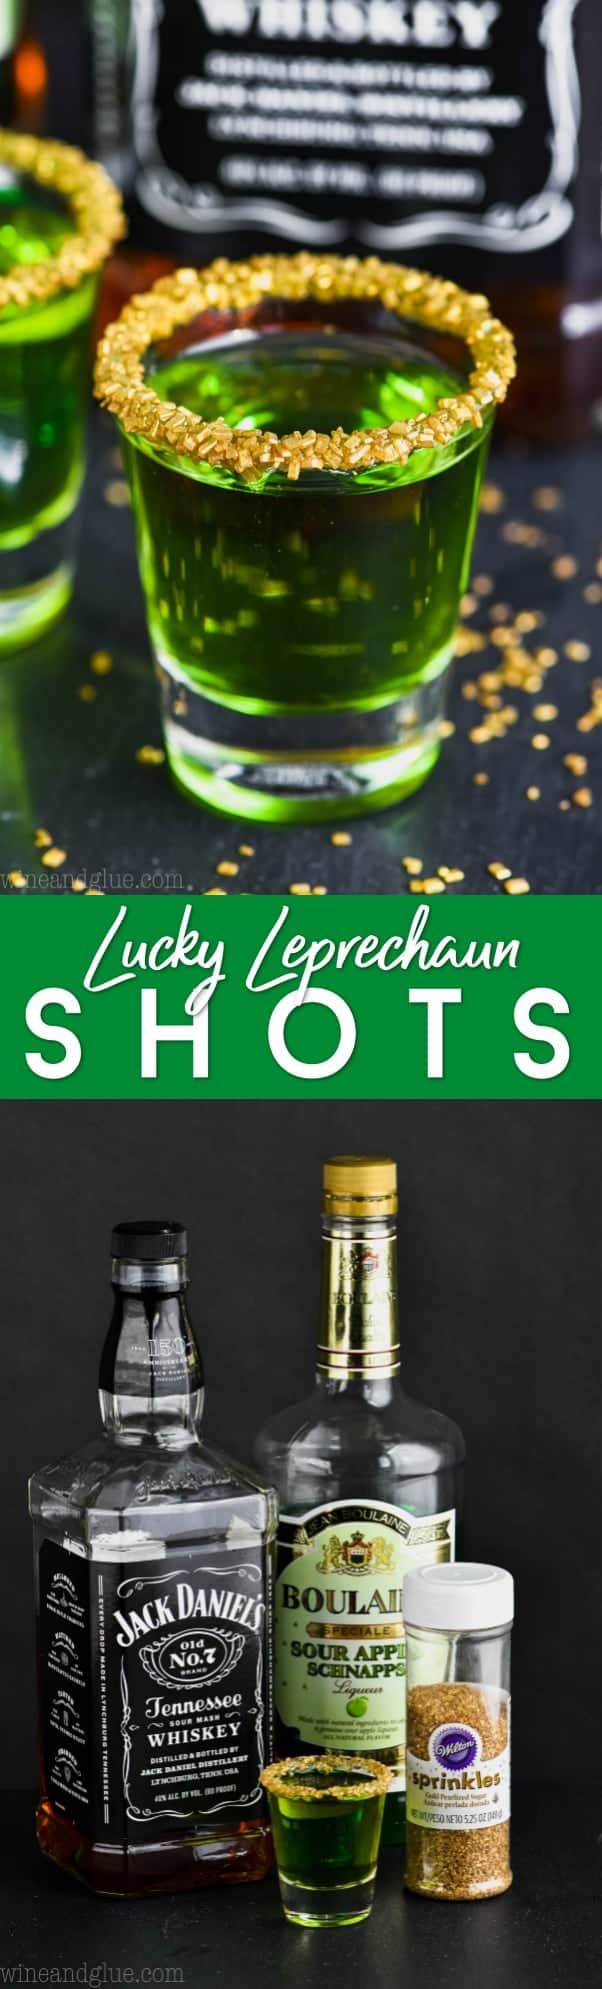 collage of pictures for lucky leprechaun shots for st patrick's day